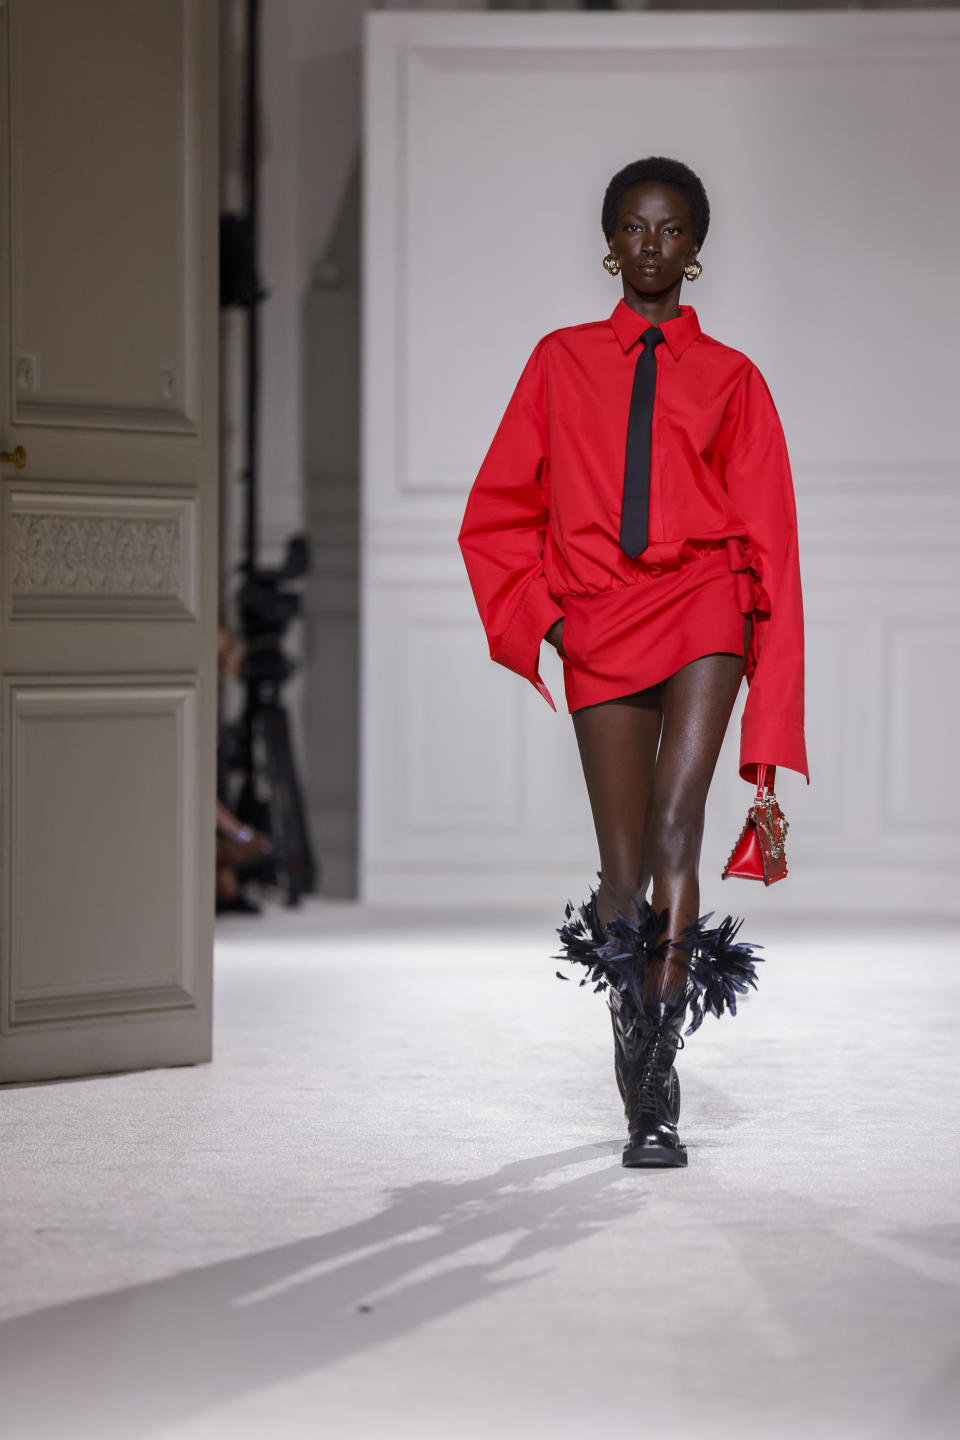 A model wears a creation as part of the Valentino Fall/Winter 2023-2024 ready-to-wear collection presented Sunday, March 5, 2023 in Paris. (Vianney Le Caer/Invision/AP)